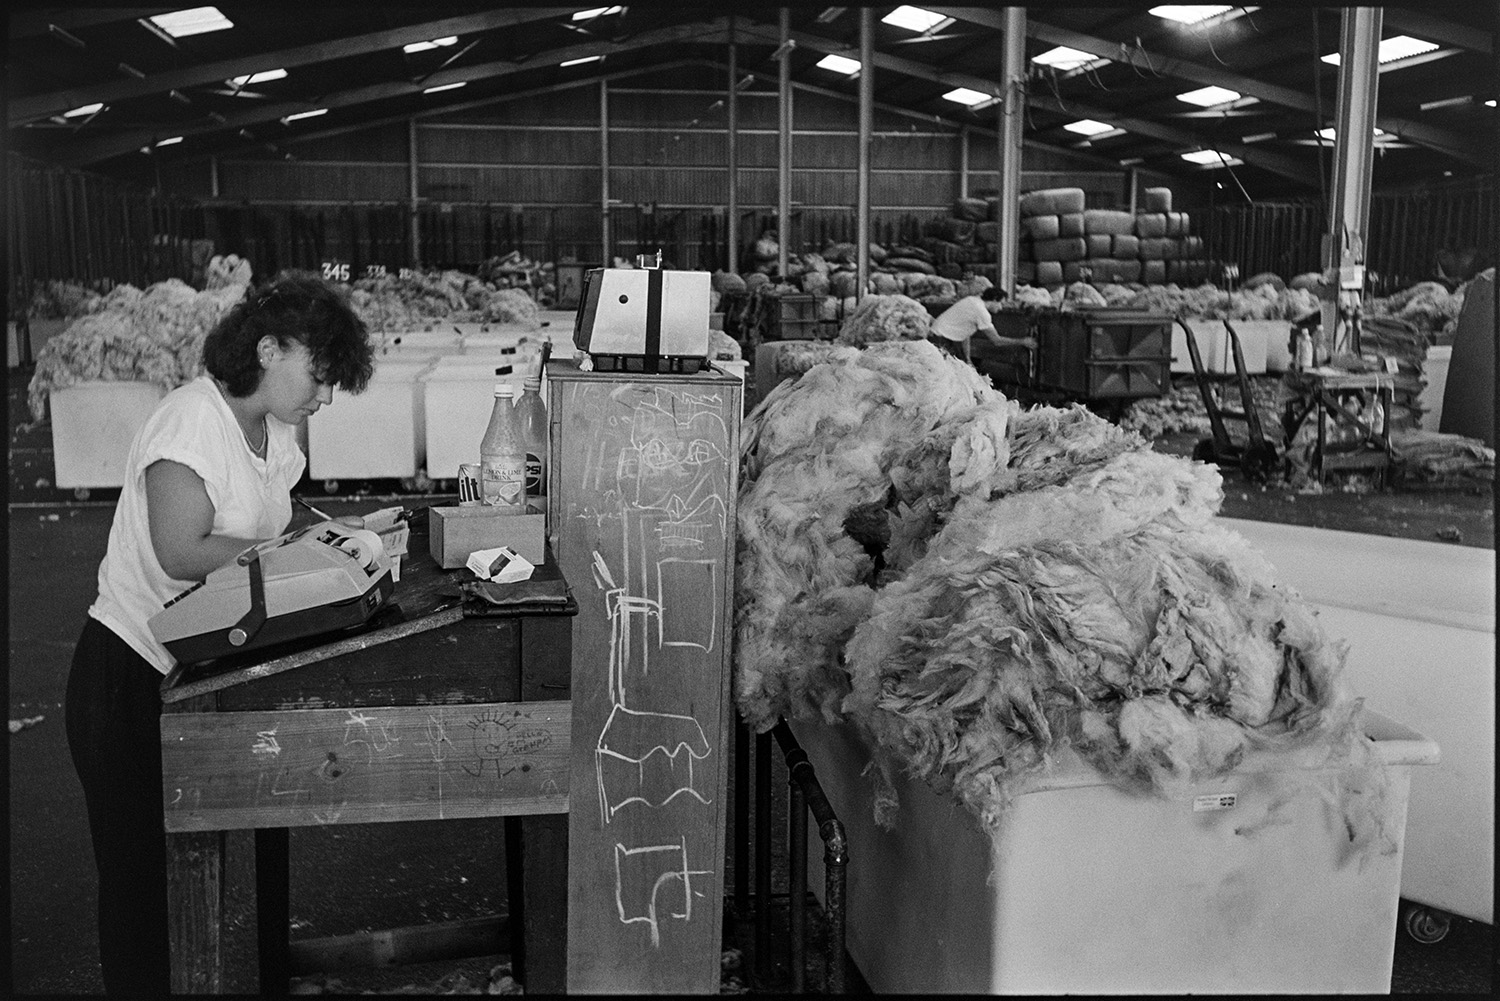 A woman recording information next to a receipt machine at a desk in the warehouse of Devon & Cornwall Wools Ltd at the Pathfields Business Park in South Molton. She is surrounded by bins of wool and fleeces.